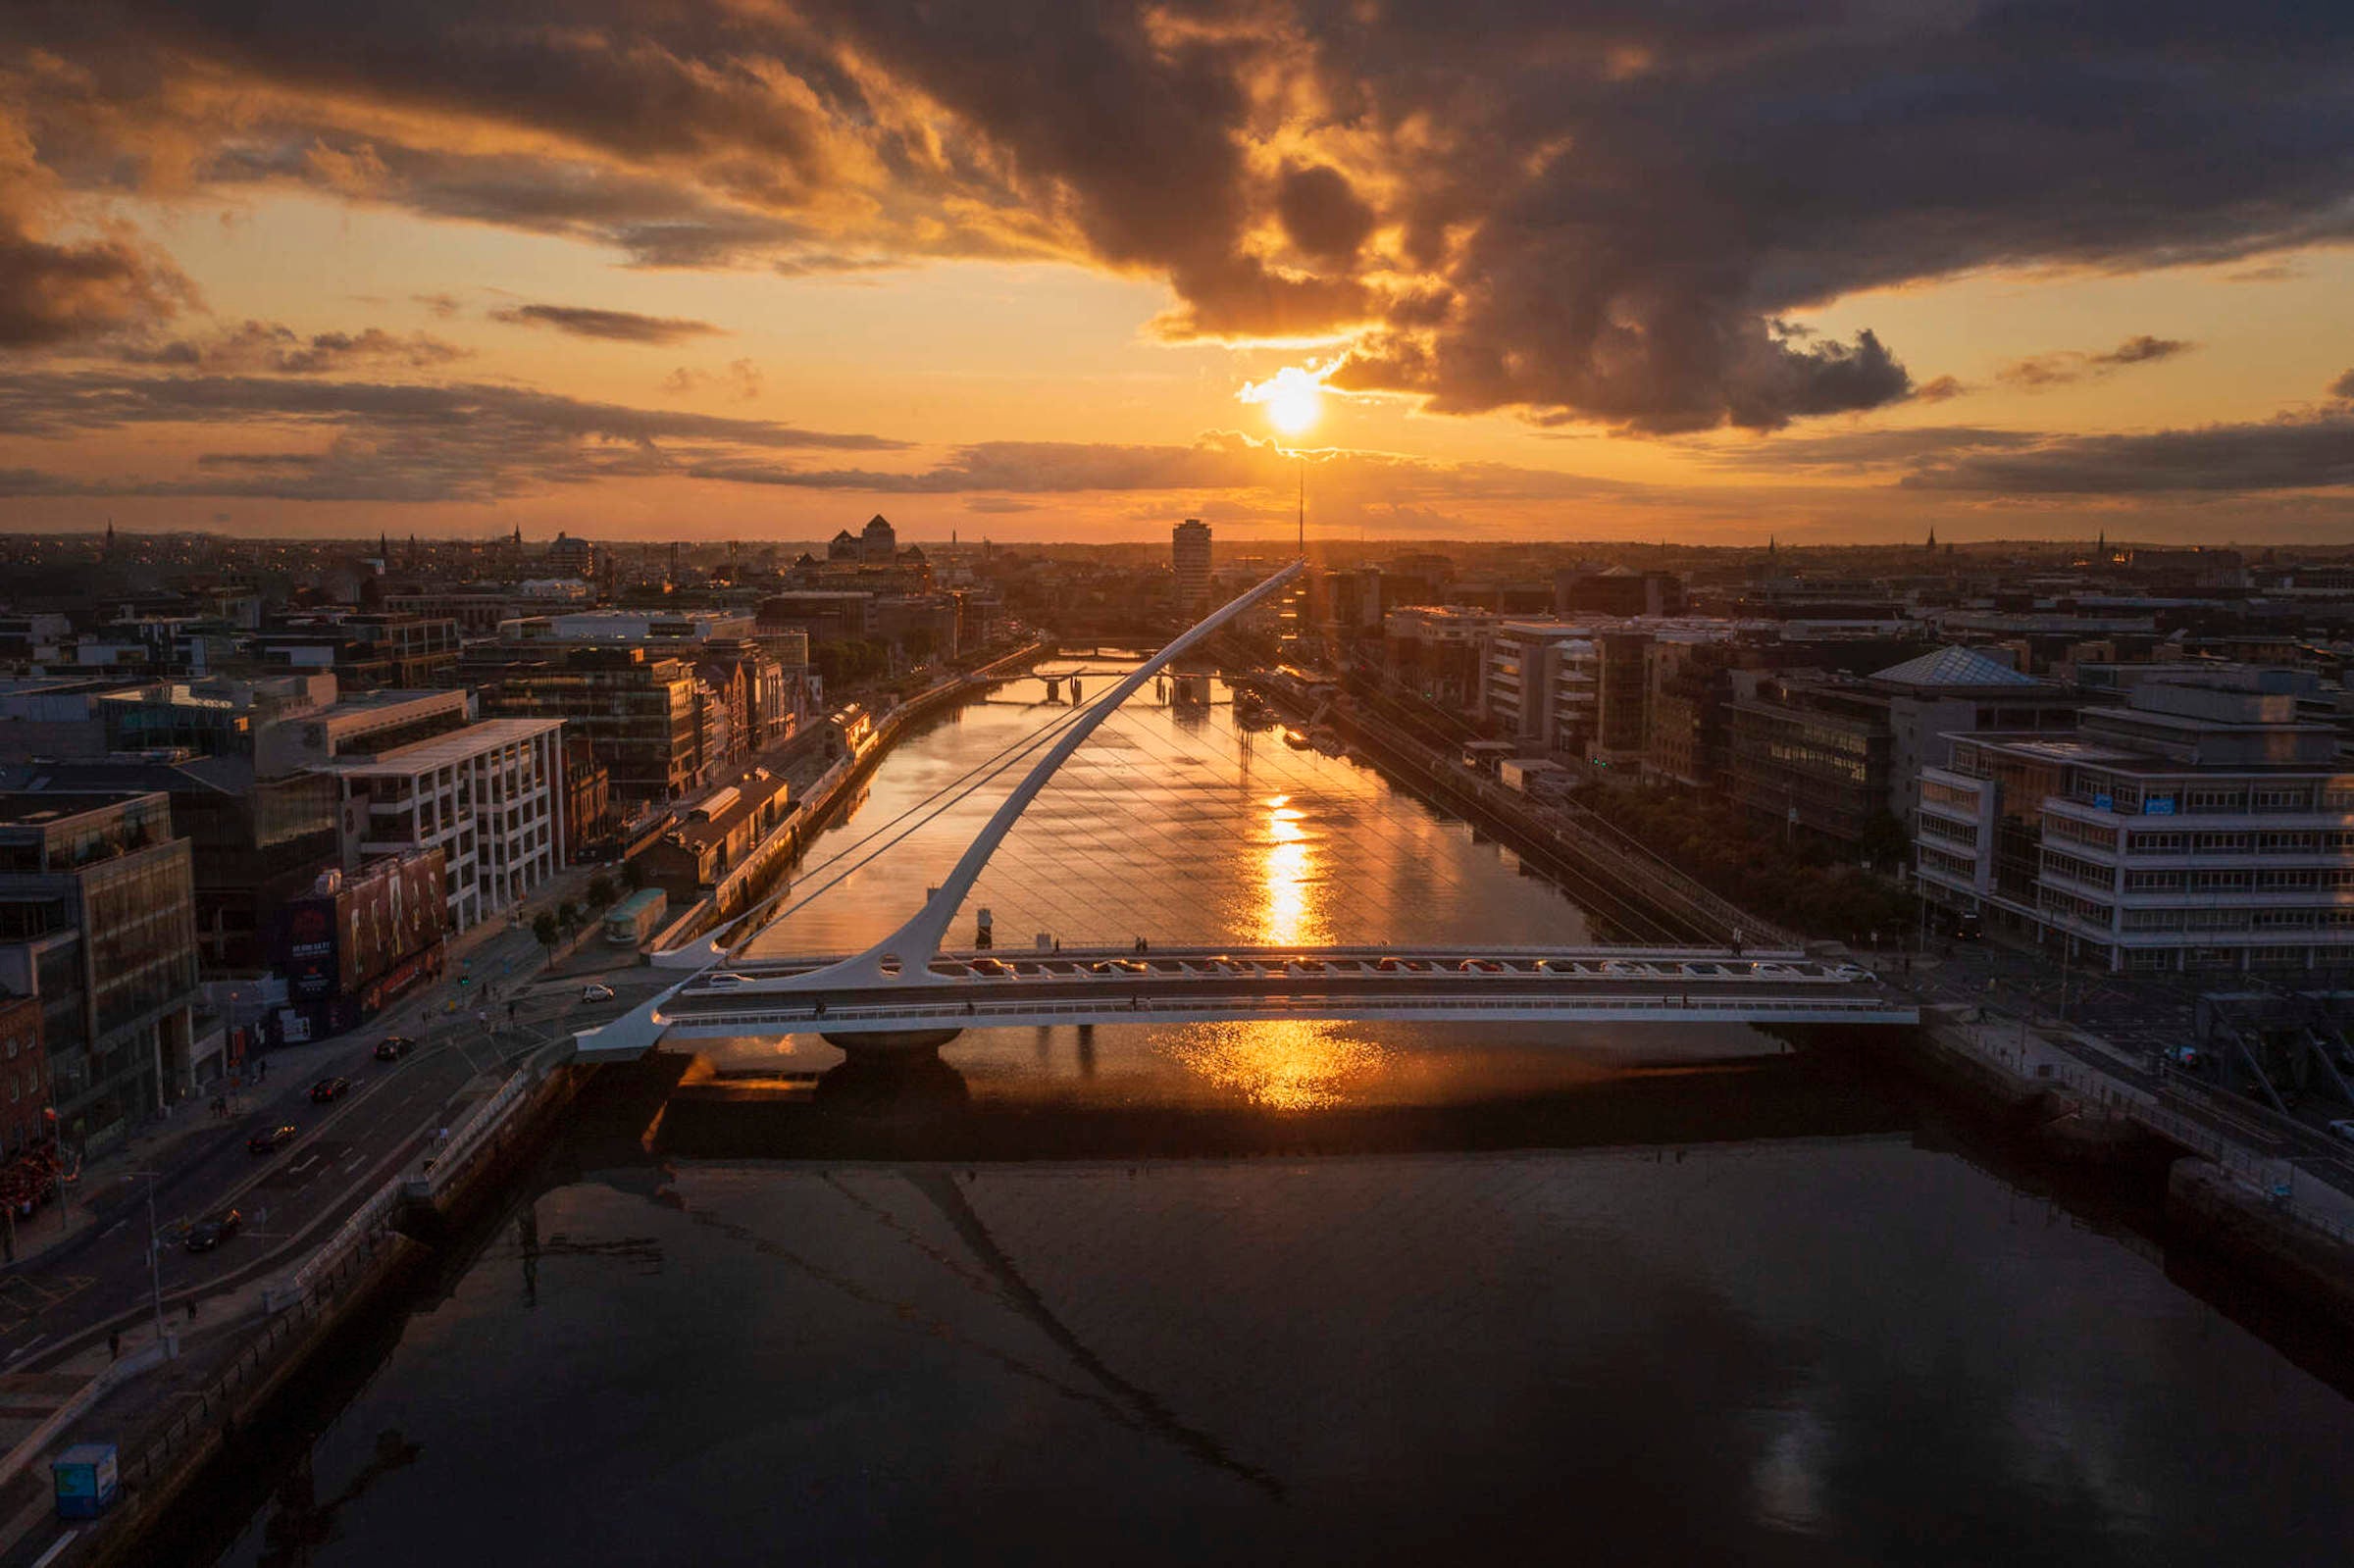 Sunset over the River Liffey in Dublin.